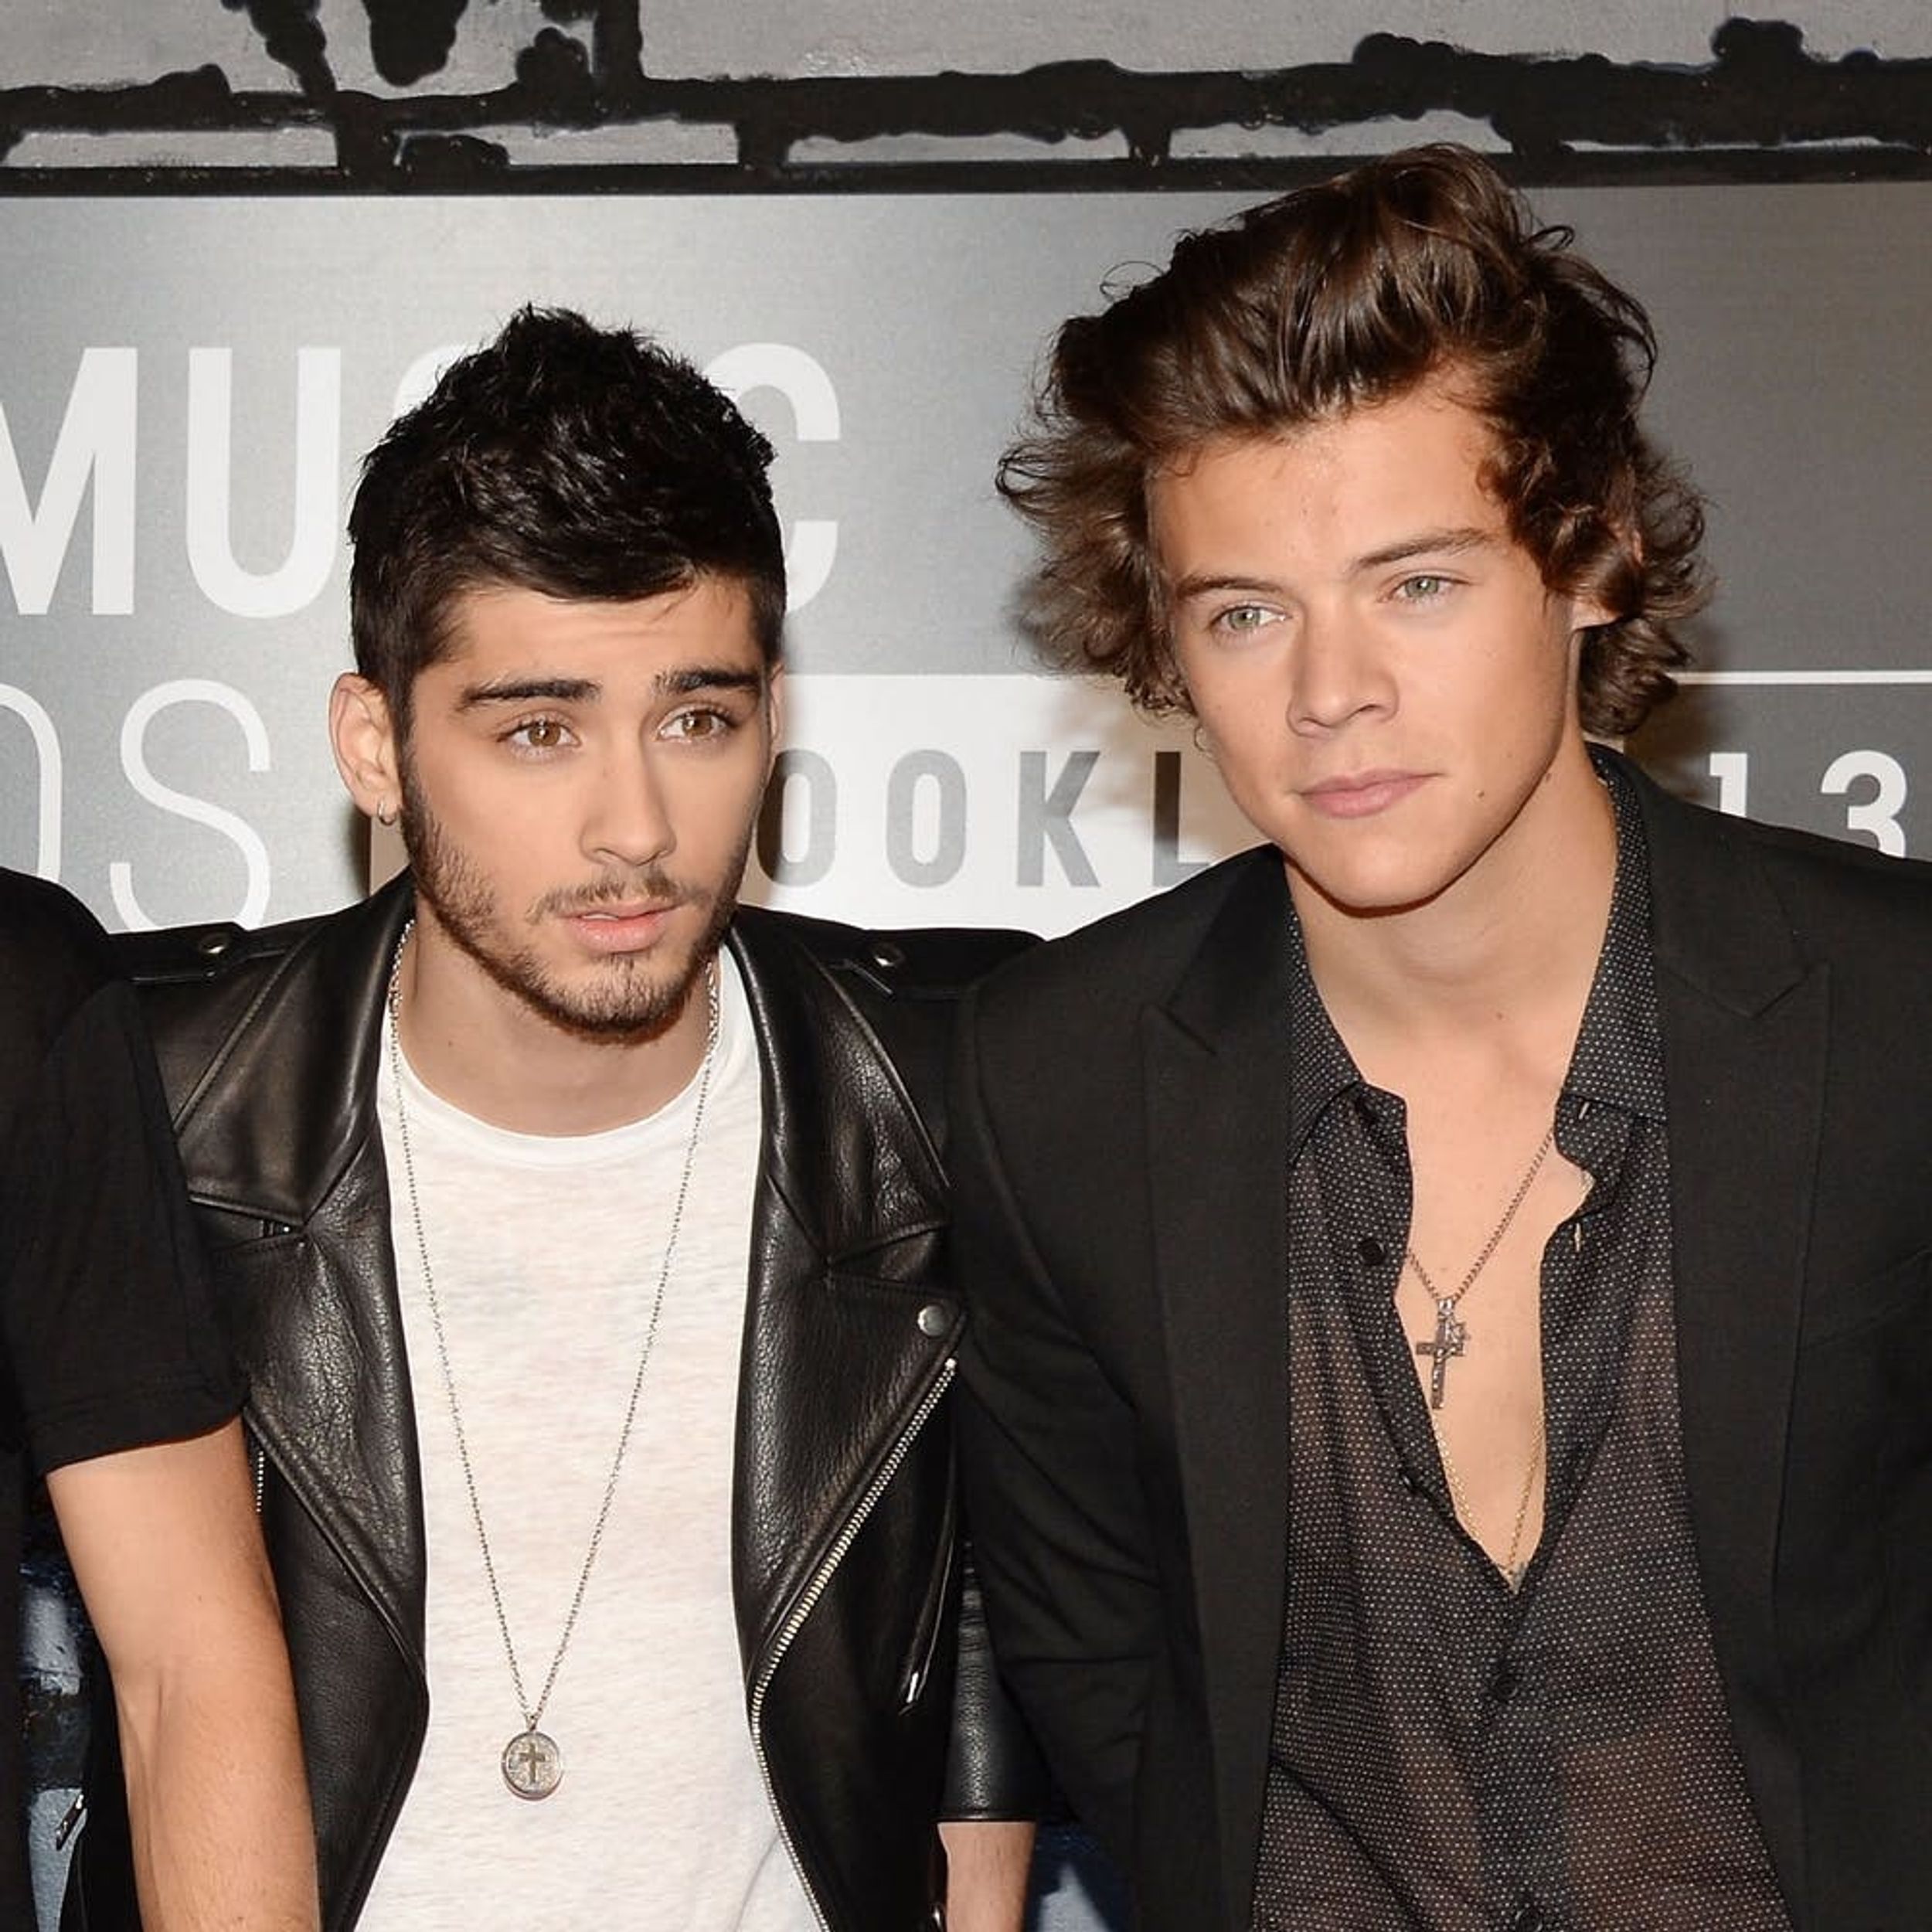 Zayn Malik Admits He “Never Really Spoke” to Harry Styles While in One Direction